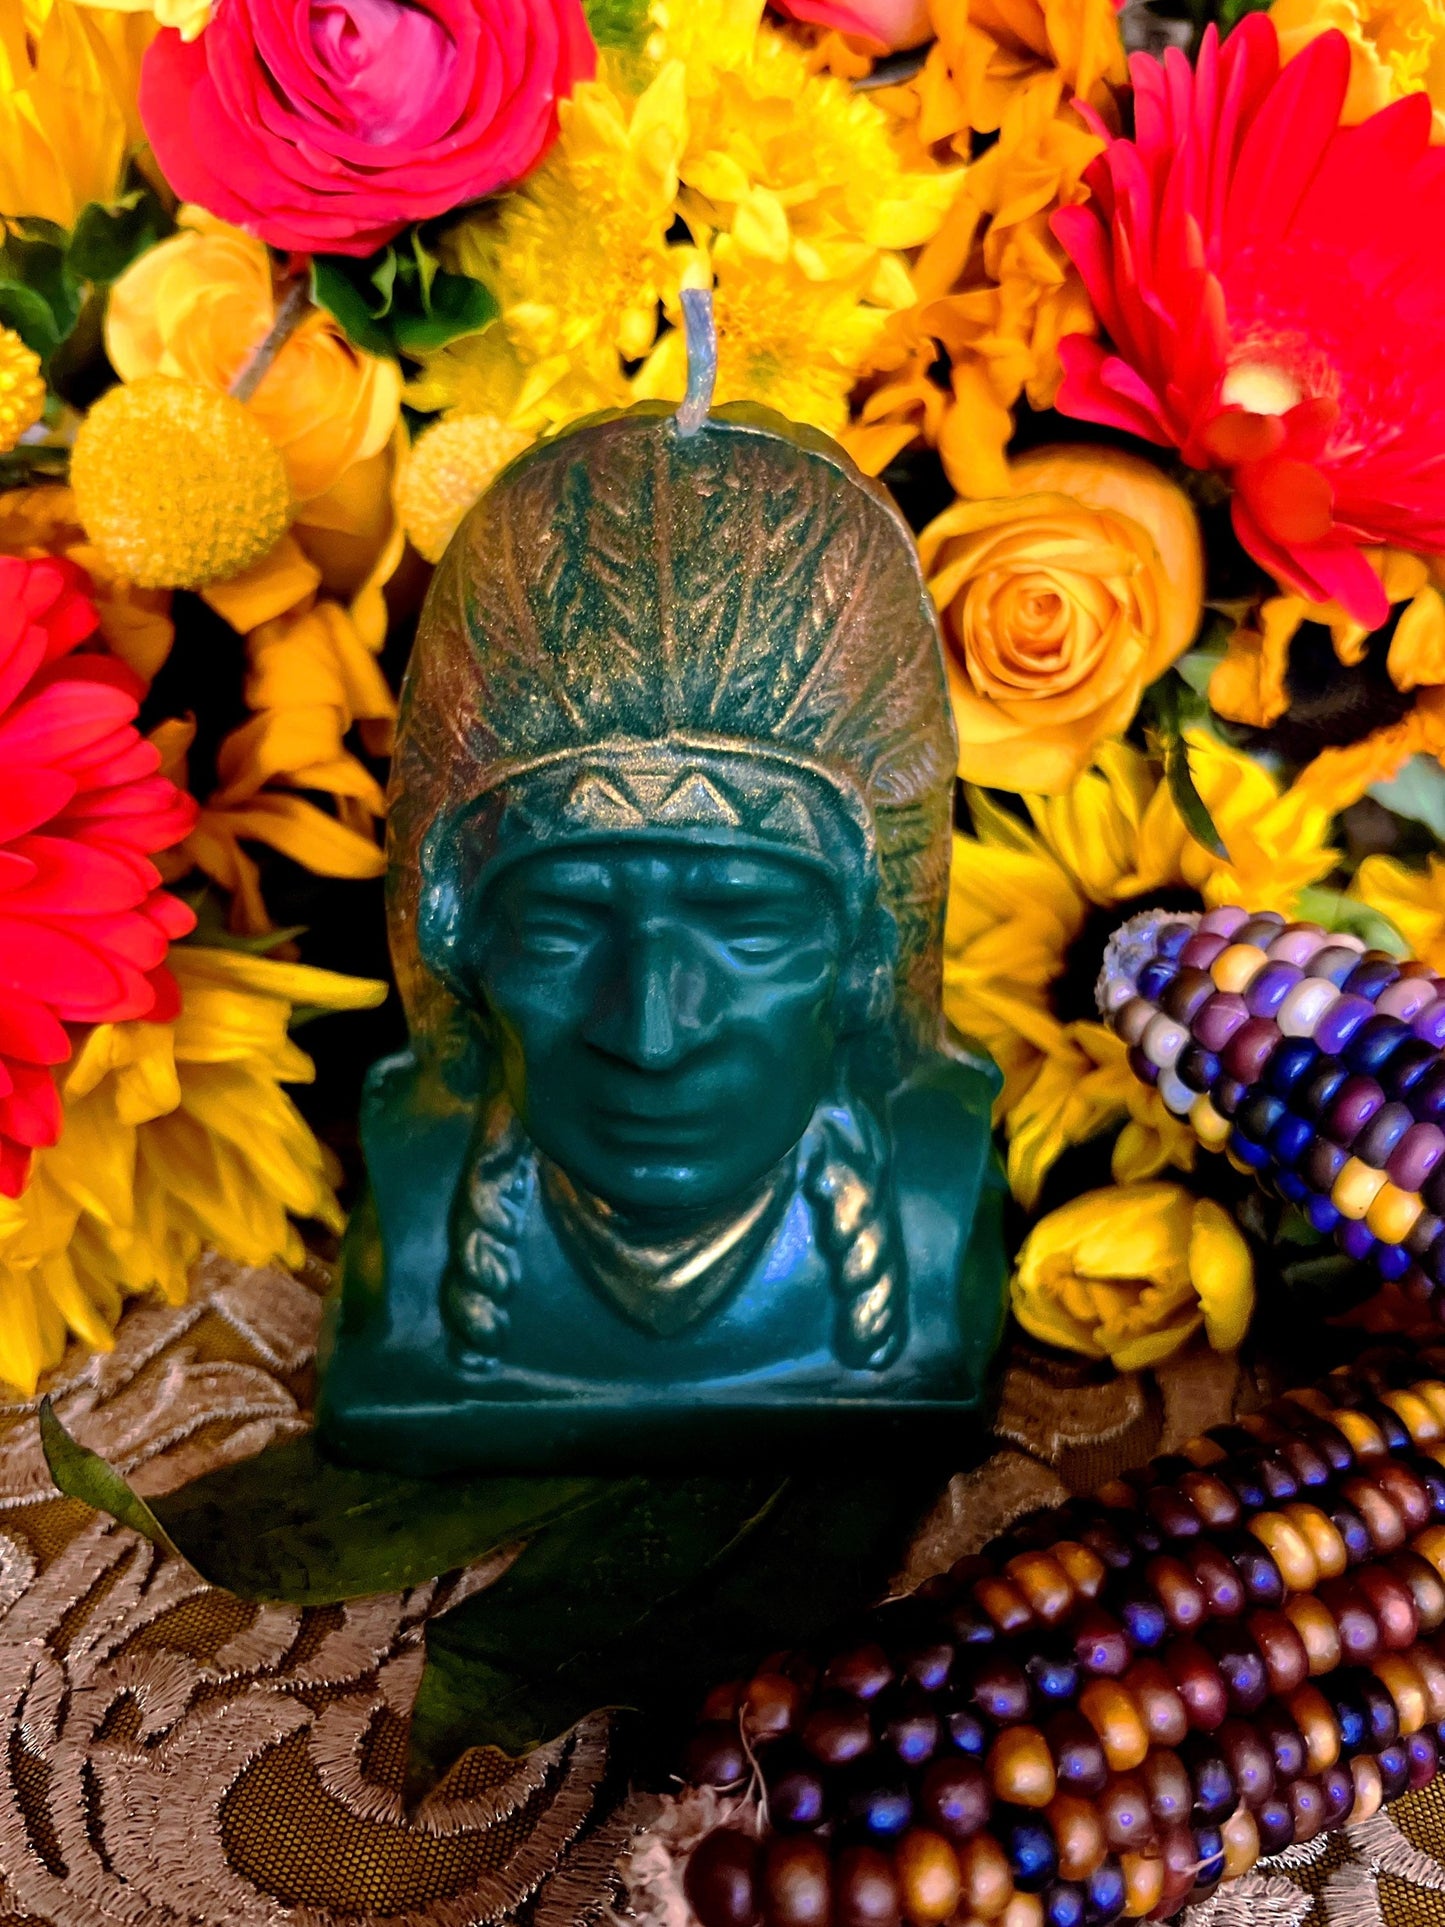 Native American Chief Candle + Indigenous + Indio + Indian + Blackhawk + Guidance + Protection